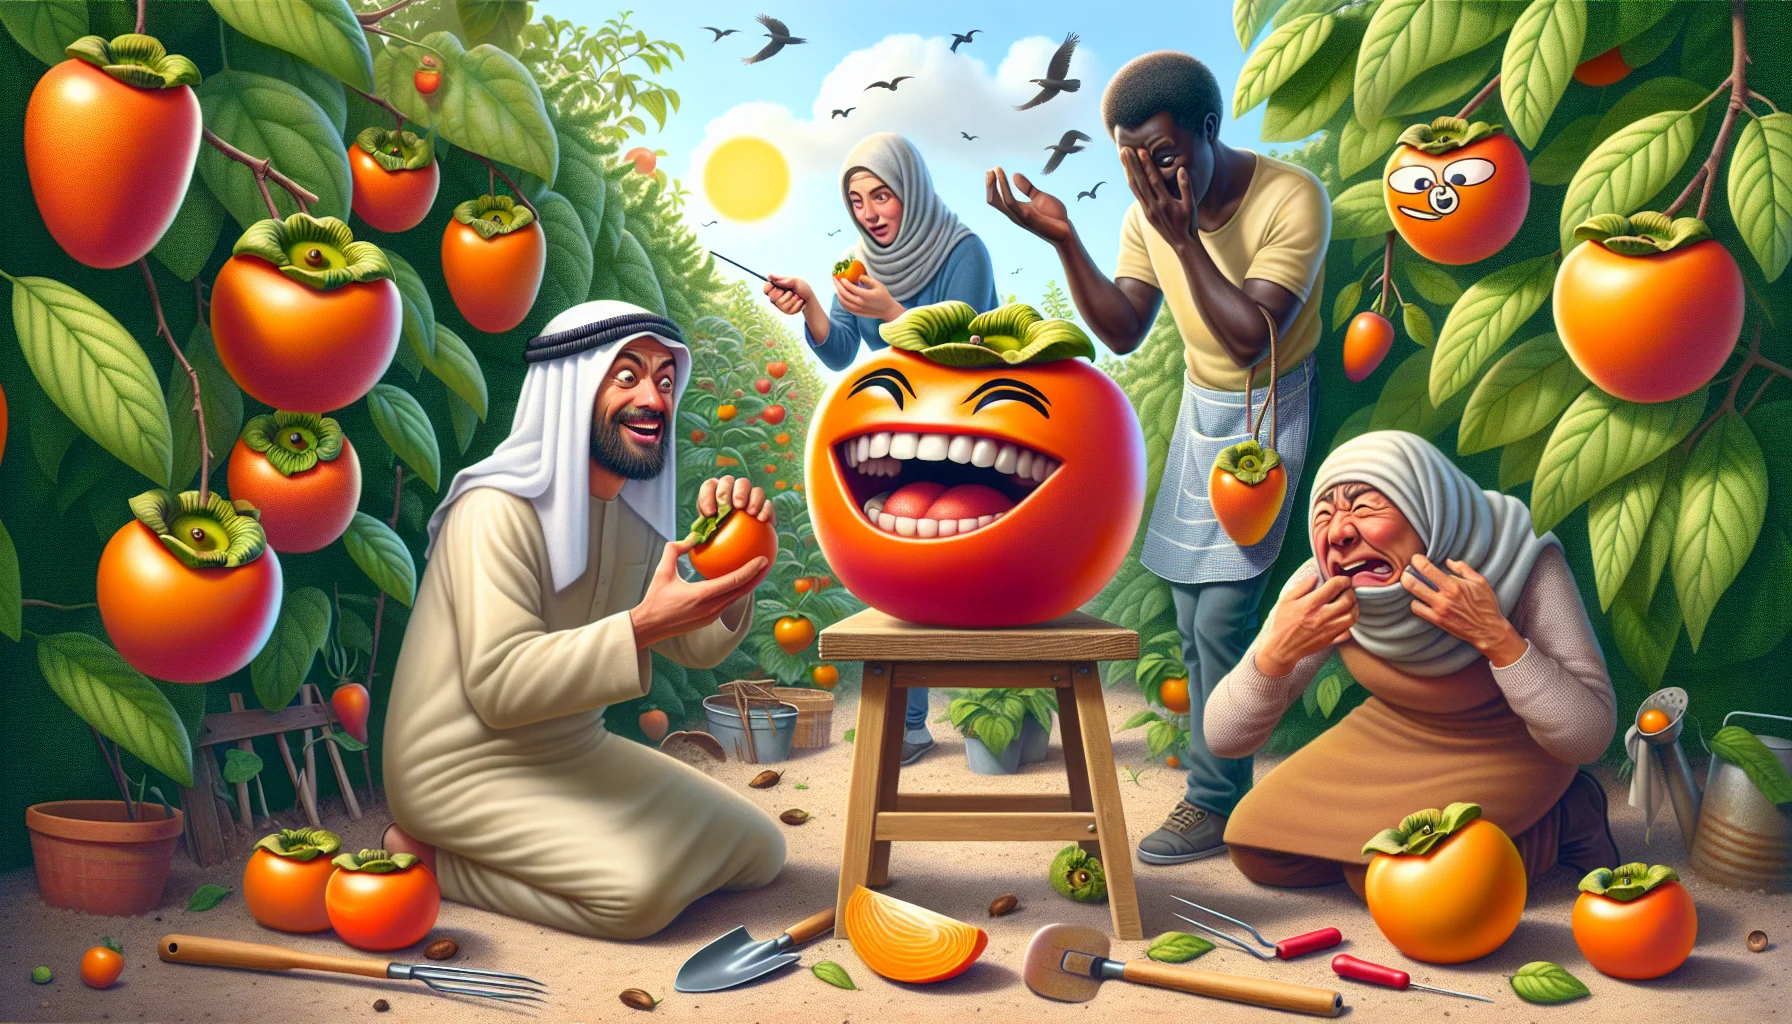 Create an image that depicts a humorous scenario in a garden setting where different individuals are trying to determine if persimmons are ripe. This scene could feature fruits with unique, exaggerated facial expressions showcasing ripening stages. For instance, a Middle-Eastern man could be seen squinting at a laughing persimmon that's radiantly orange, indicating its ripeness, while a Black woman is gingerly poking a less ripe, lighter colored persimmon looking doubtful. The background should breathe gardening vibes: lush green plants, sunshine, garden tools strewn about and birds playfully chirping in the distance. Through this image, relay the joy of gardening and the excitement of homegrown, ripe fruits.